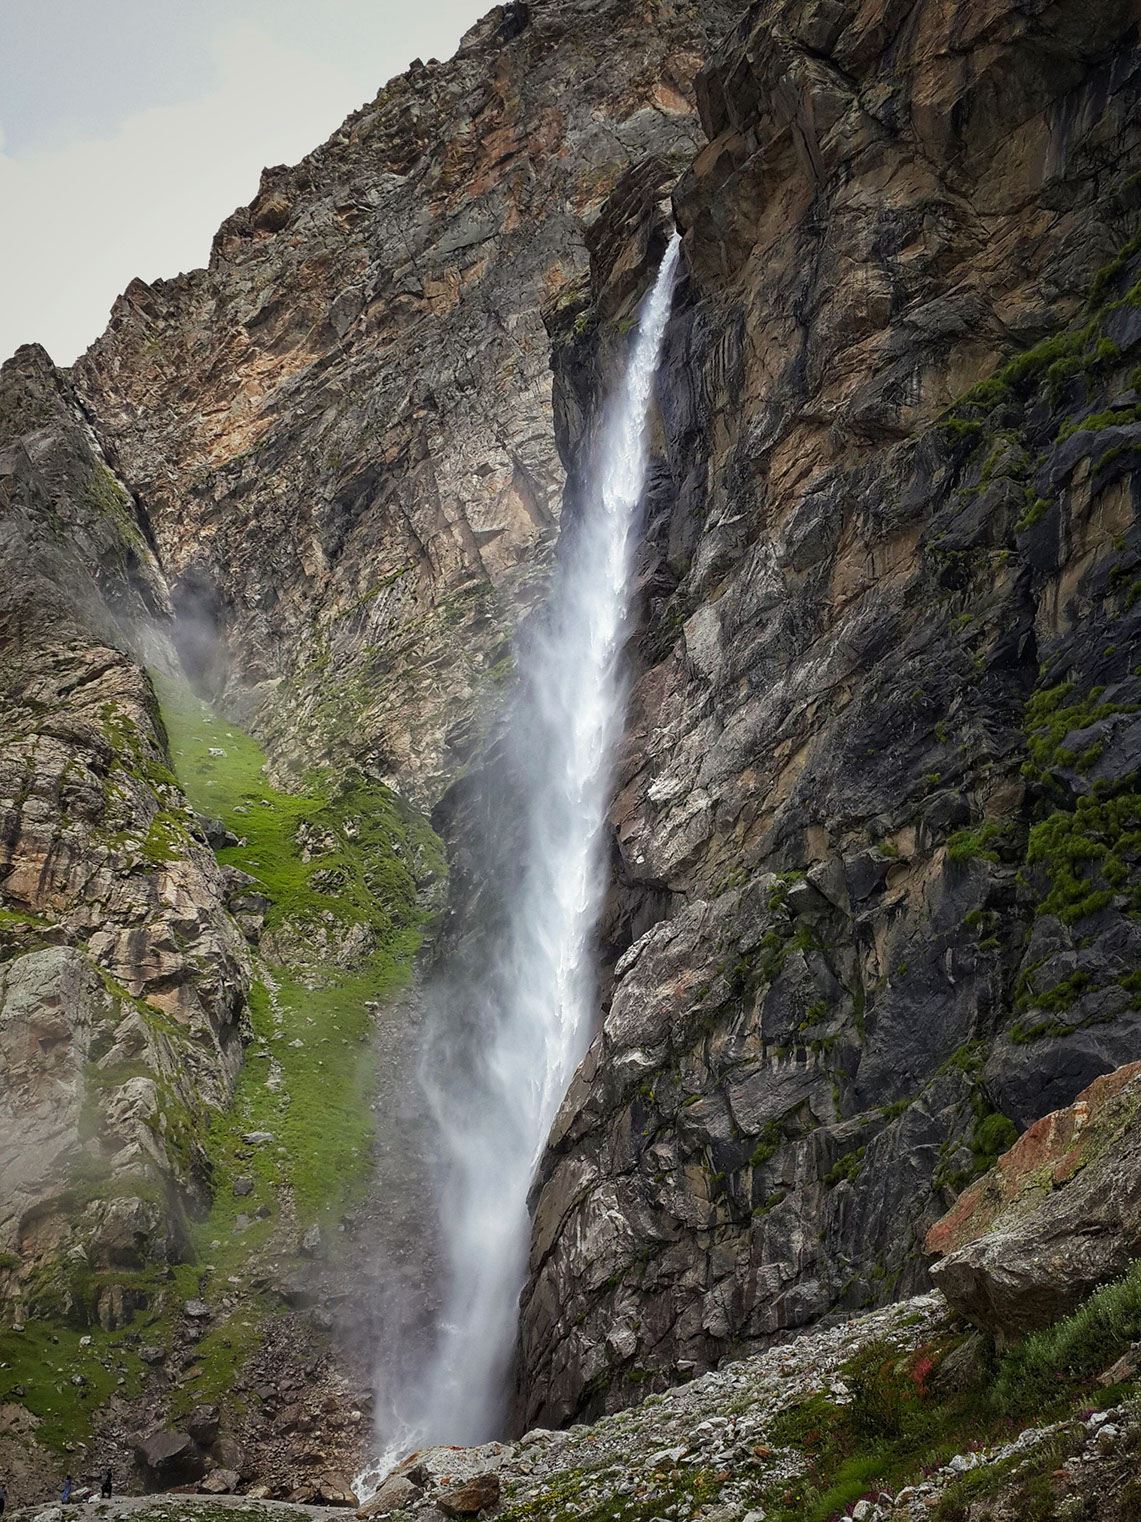 Vasundhara Falls is set at a height of 12,000 feet above sea level